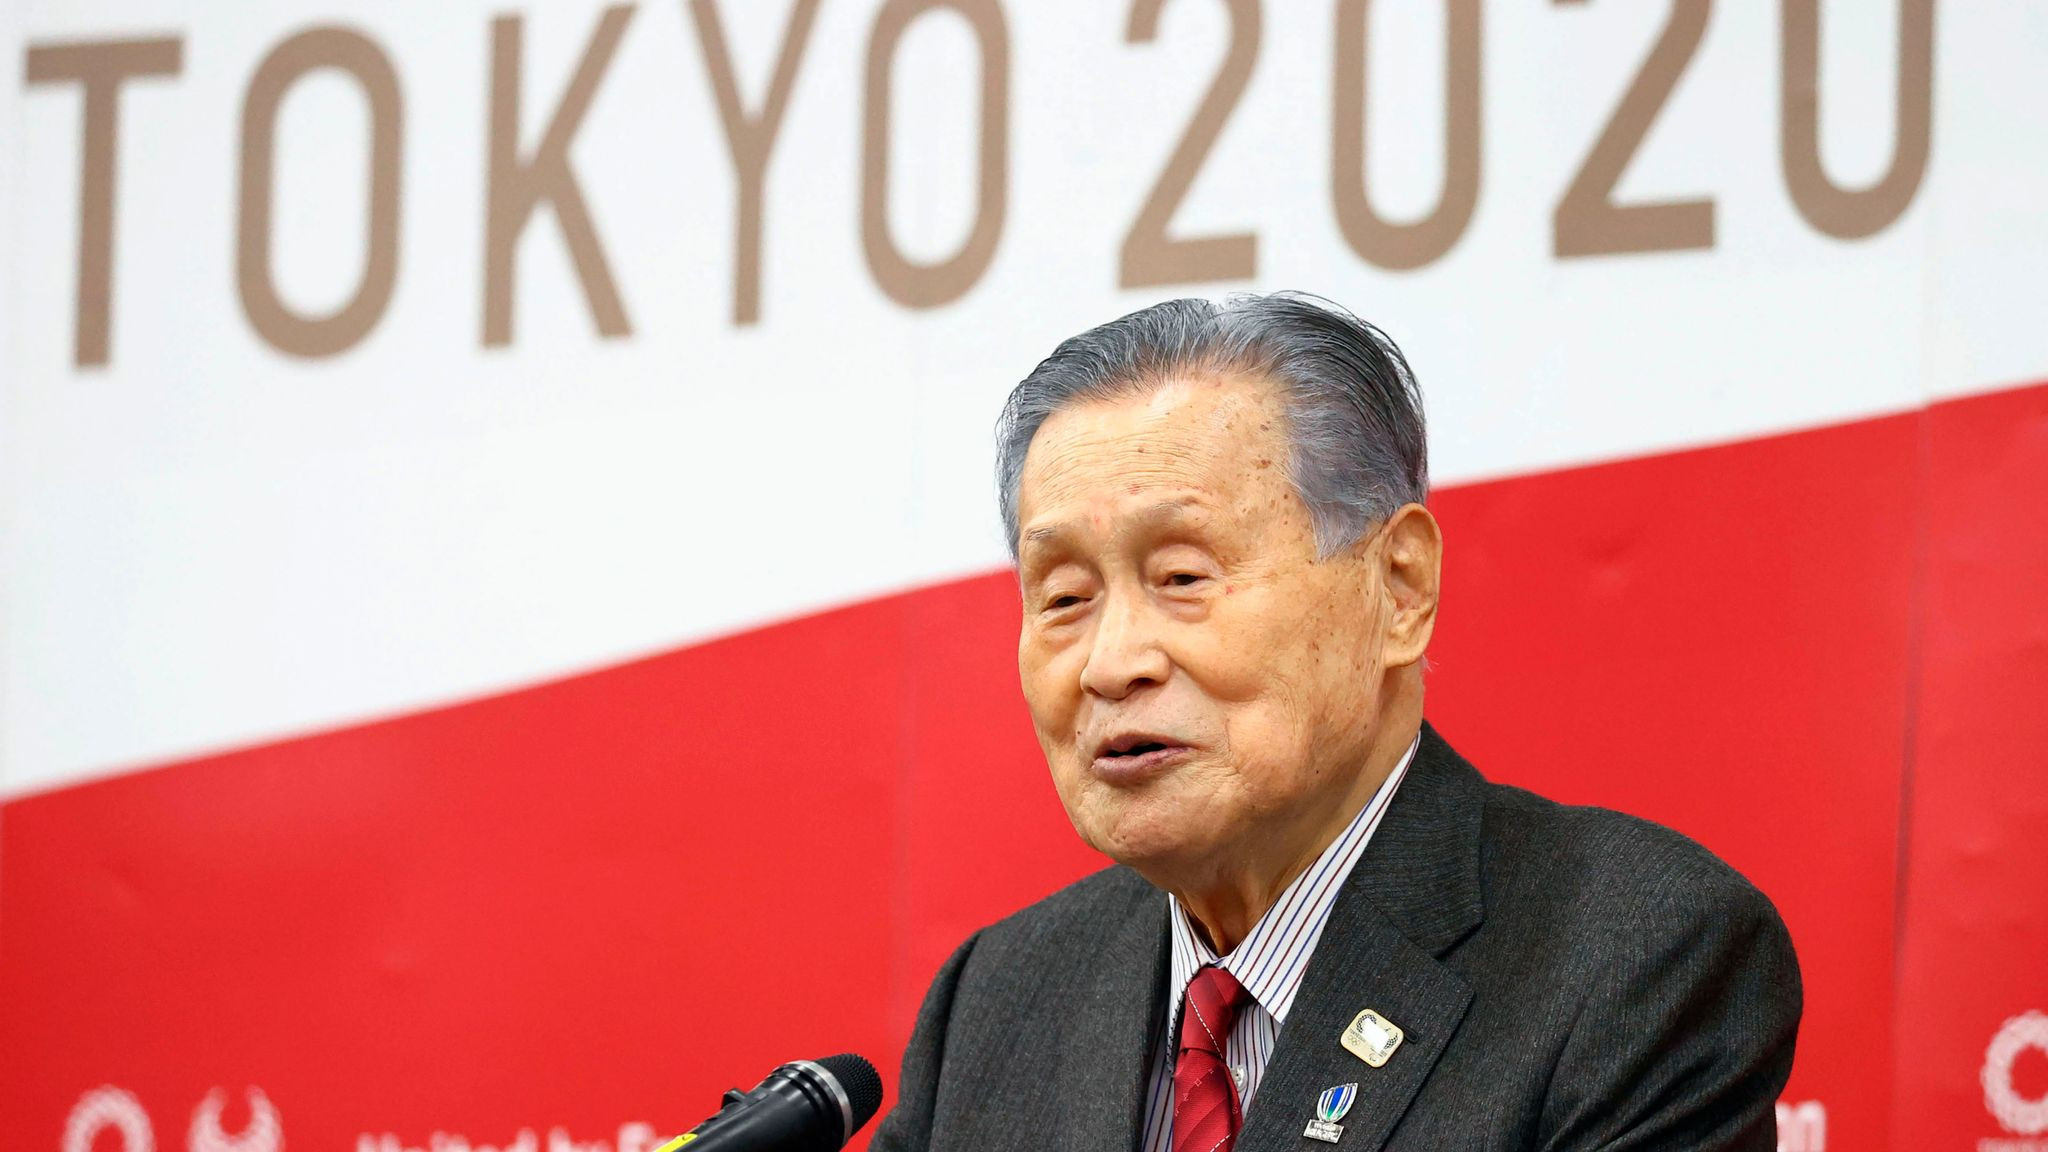 Former Tokyo 2020 President Yoshirō Mori has criticised Ukraine's leader Volodymyr Zelensky during a speech in the Japanese capital ©Getty Images